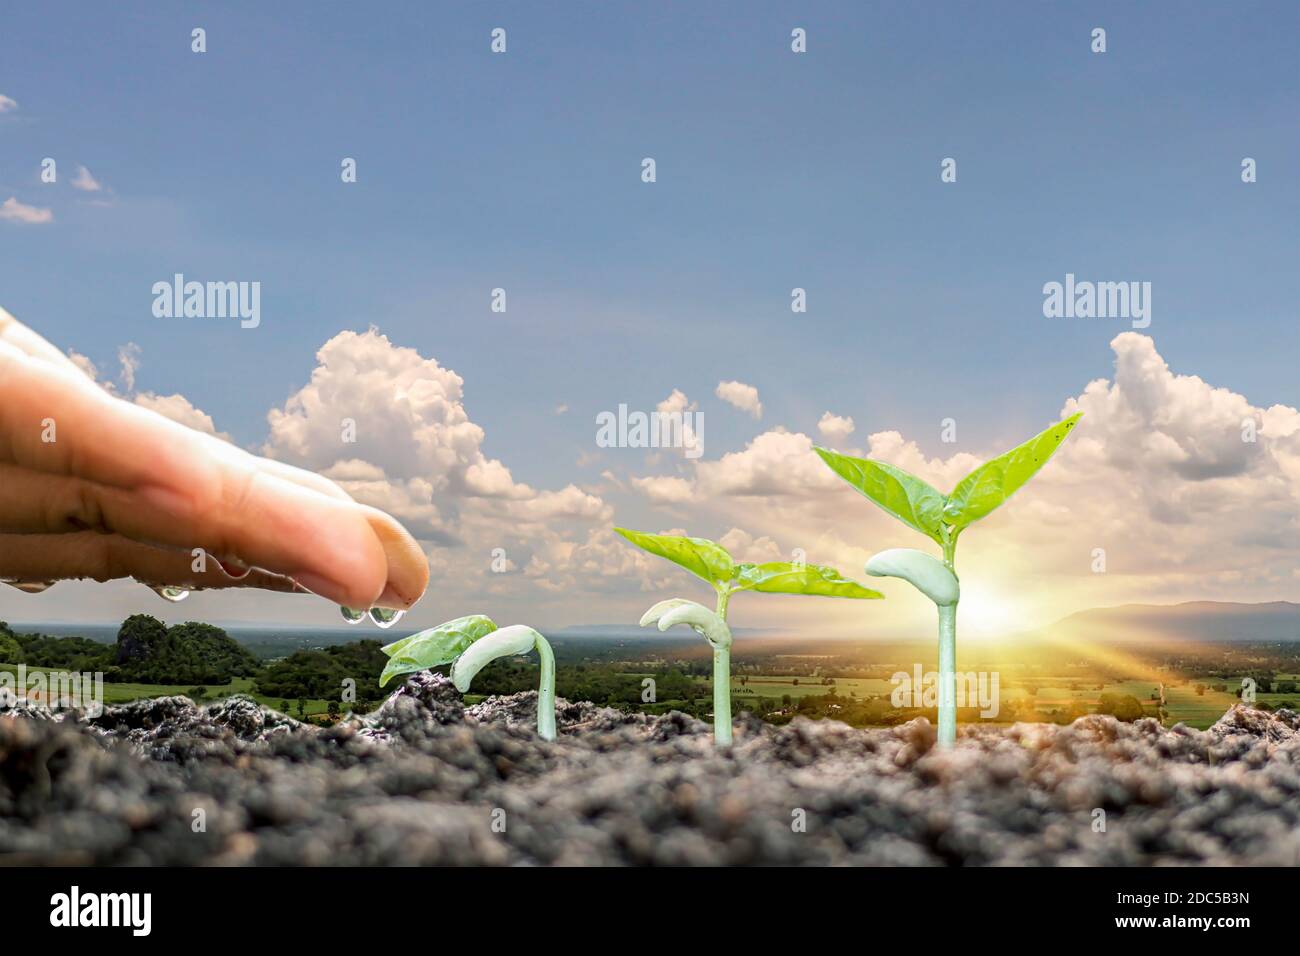 Planting plants on the soil and watering the plants including displaying the stage of plant growth, farming ideas. Stock Photo